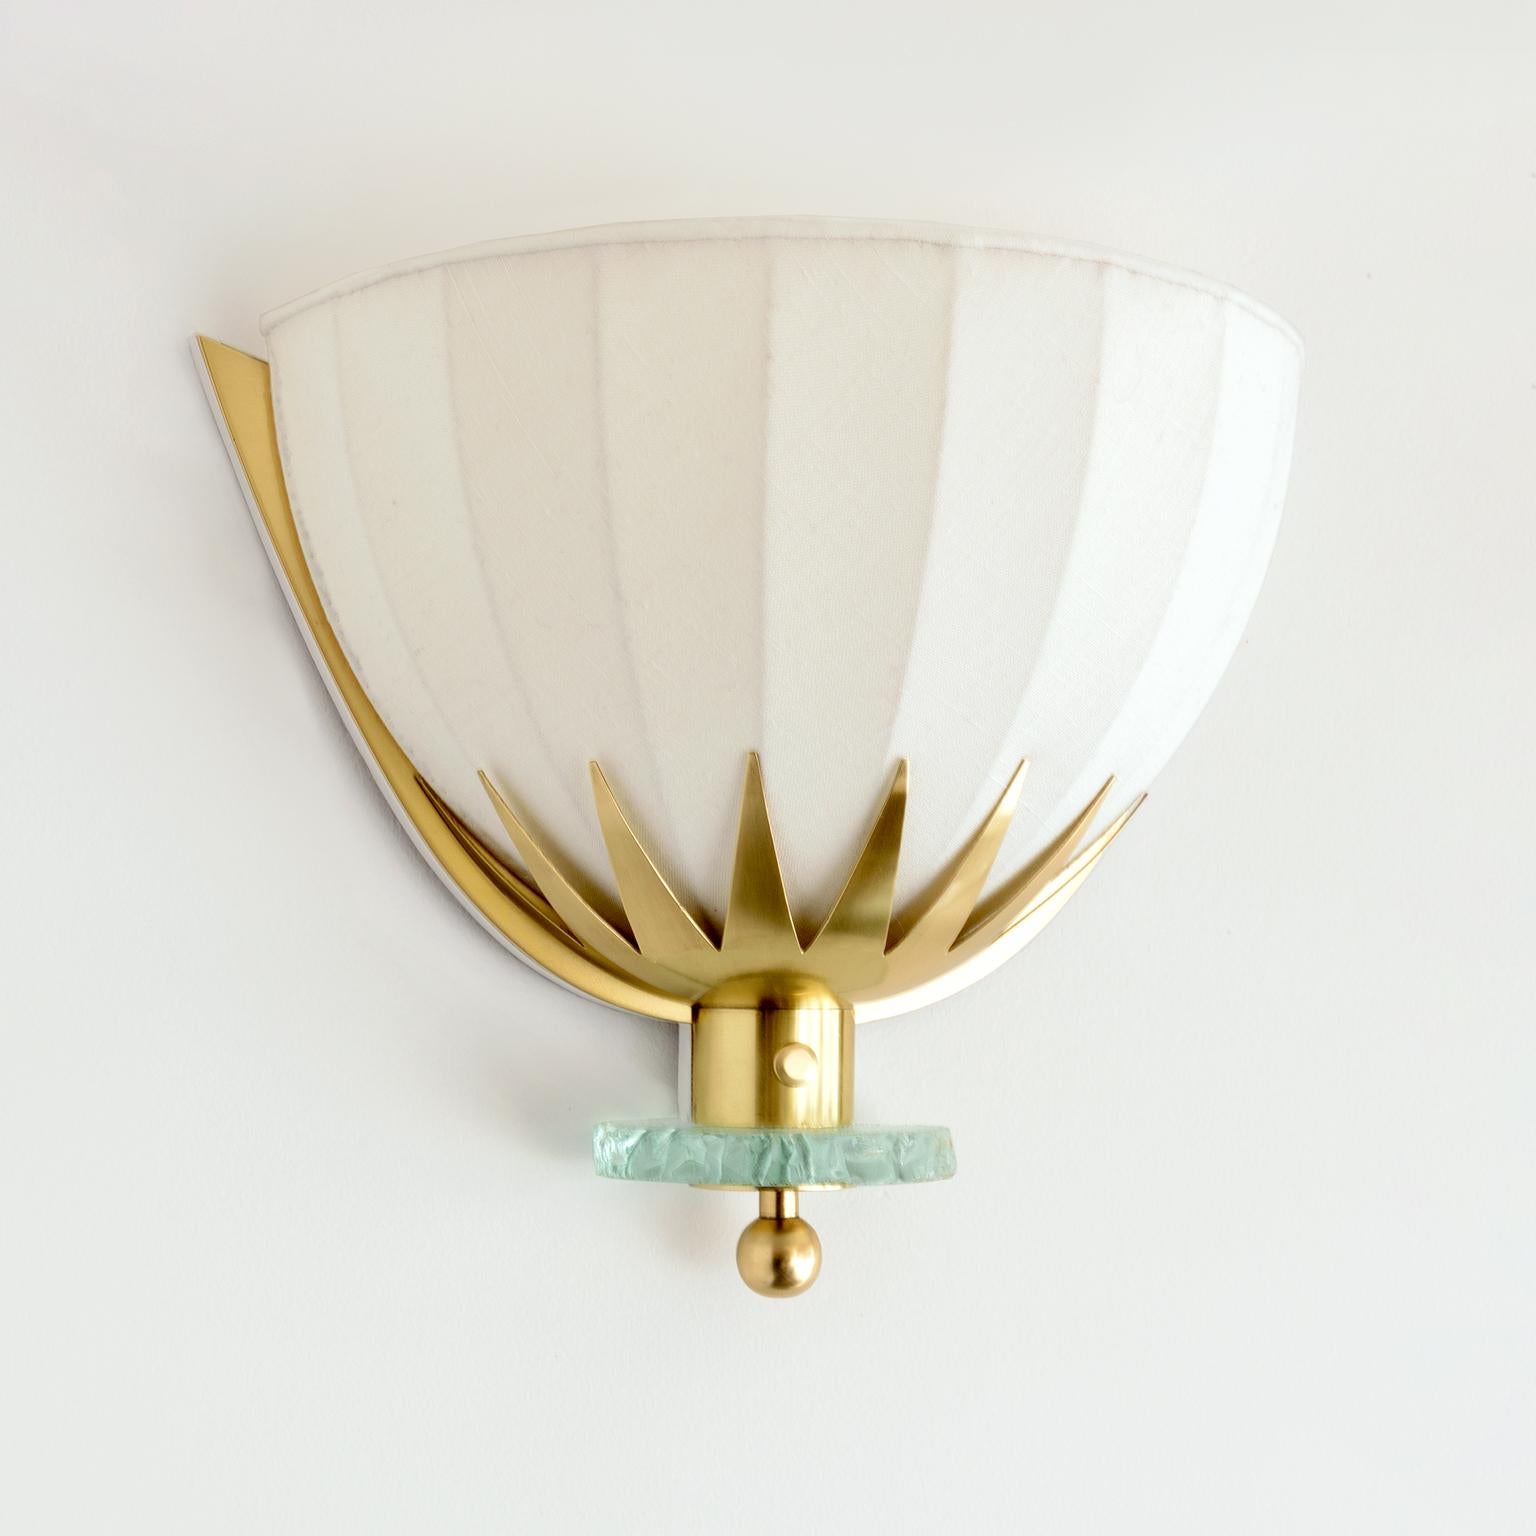 Polished Swedish Art Deco, Scandinavian Modern Brass and Glass Sconces with Fabric Shades